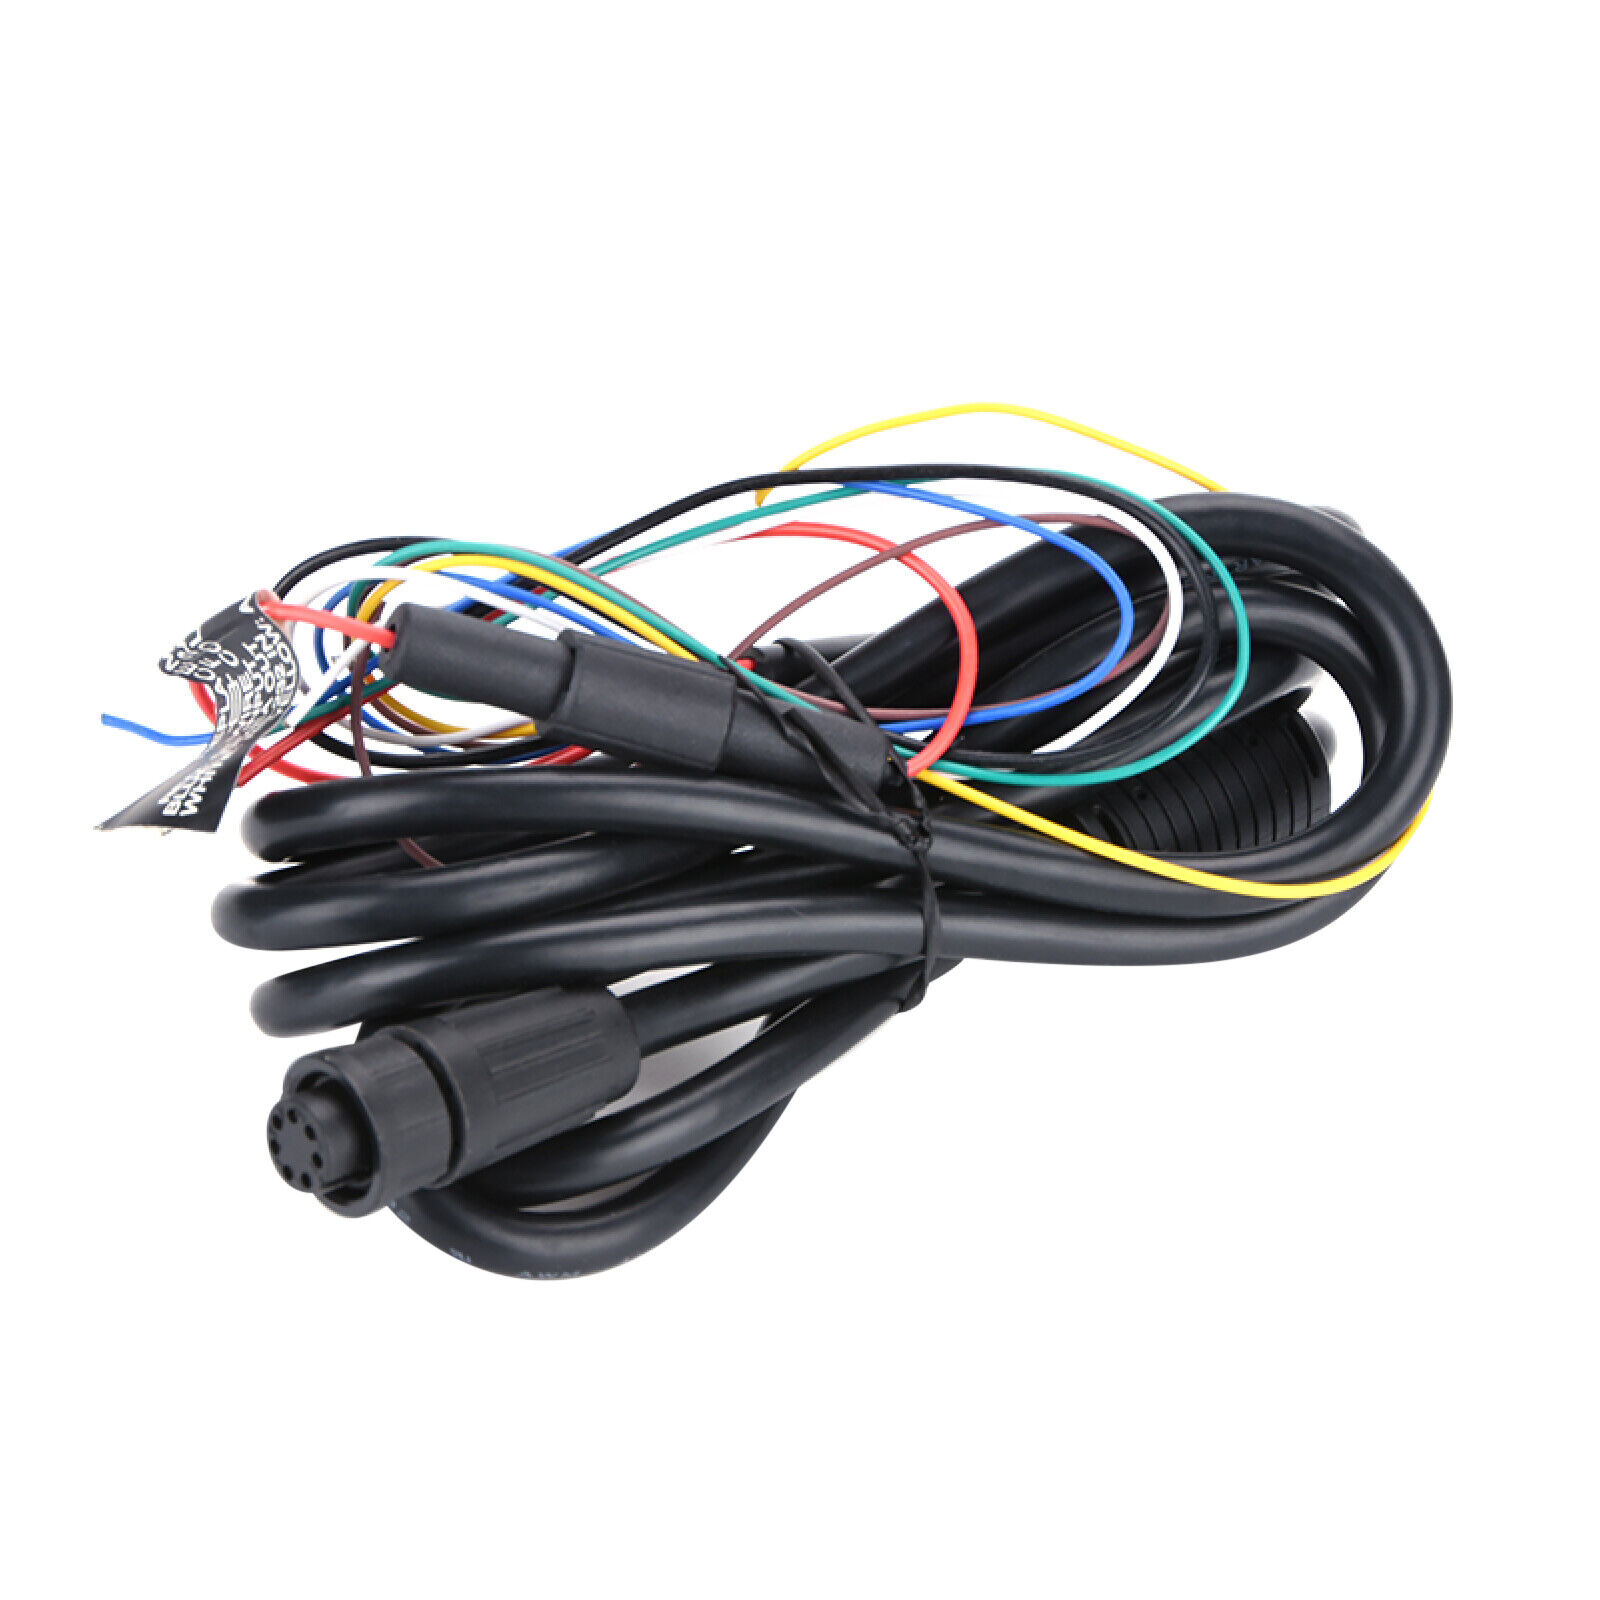 Durable 7-Pin Power Cable For GARMIN POWER CABLE GPSMAP 128 152 192C 580 GPS F